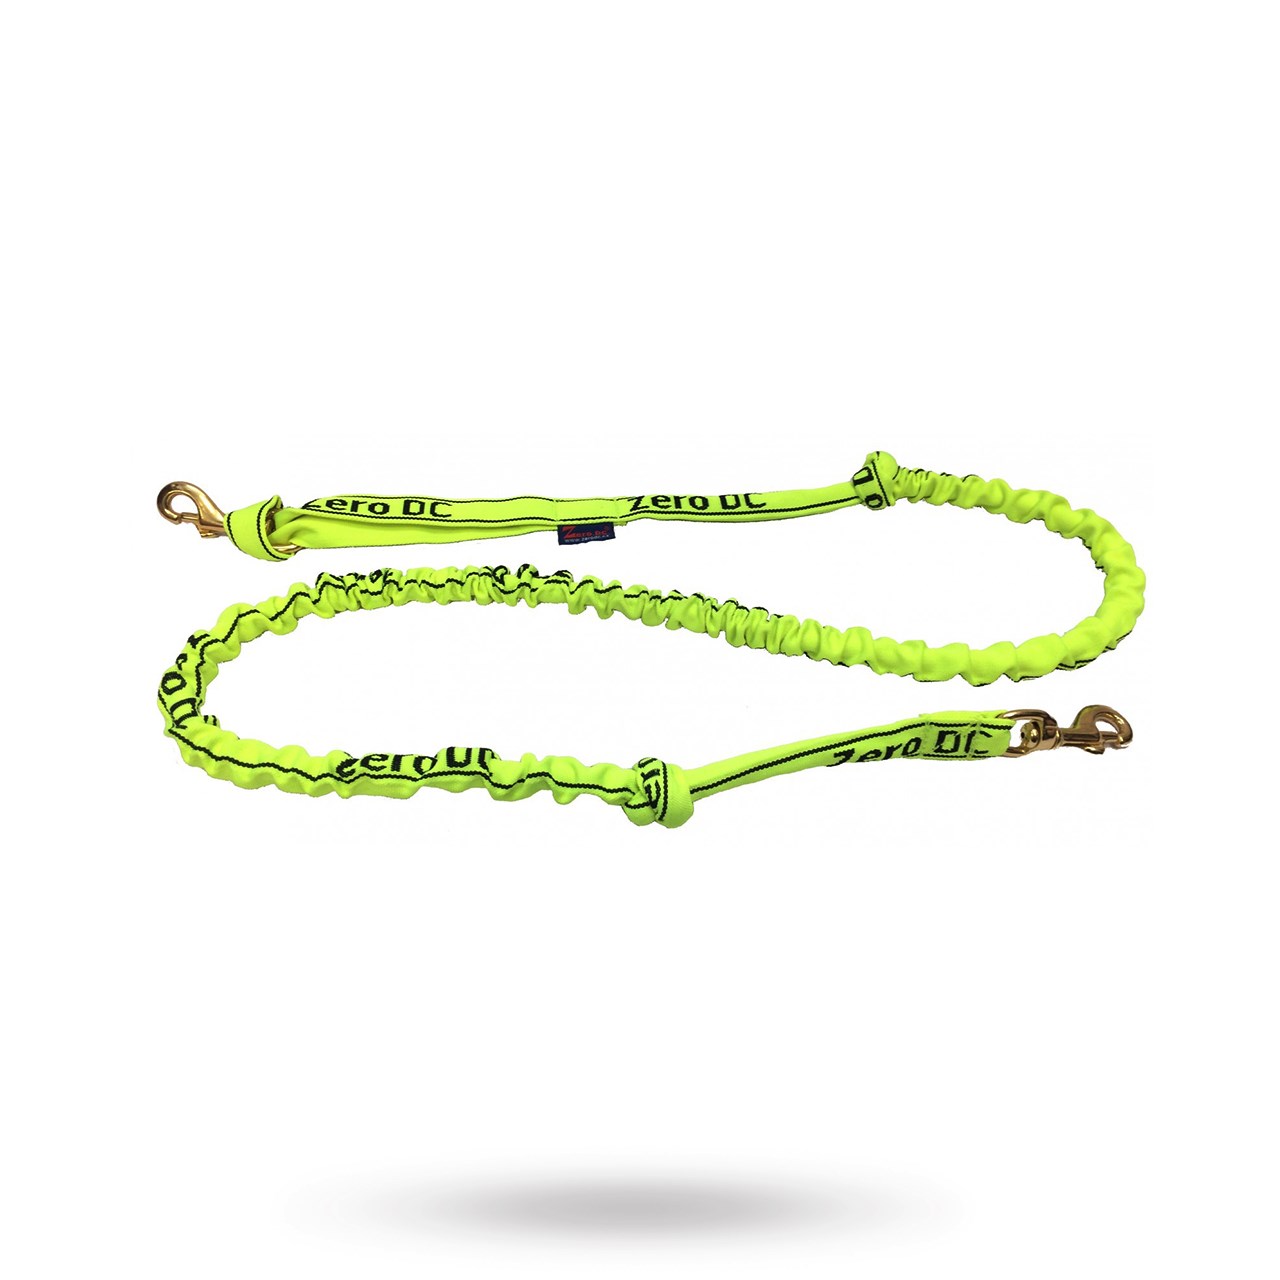 Zero Dc Bungee Lead Neon Green - Up To 10 Kg - 2.7 M